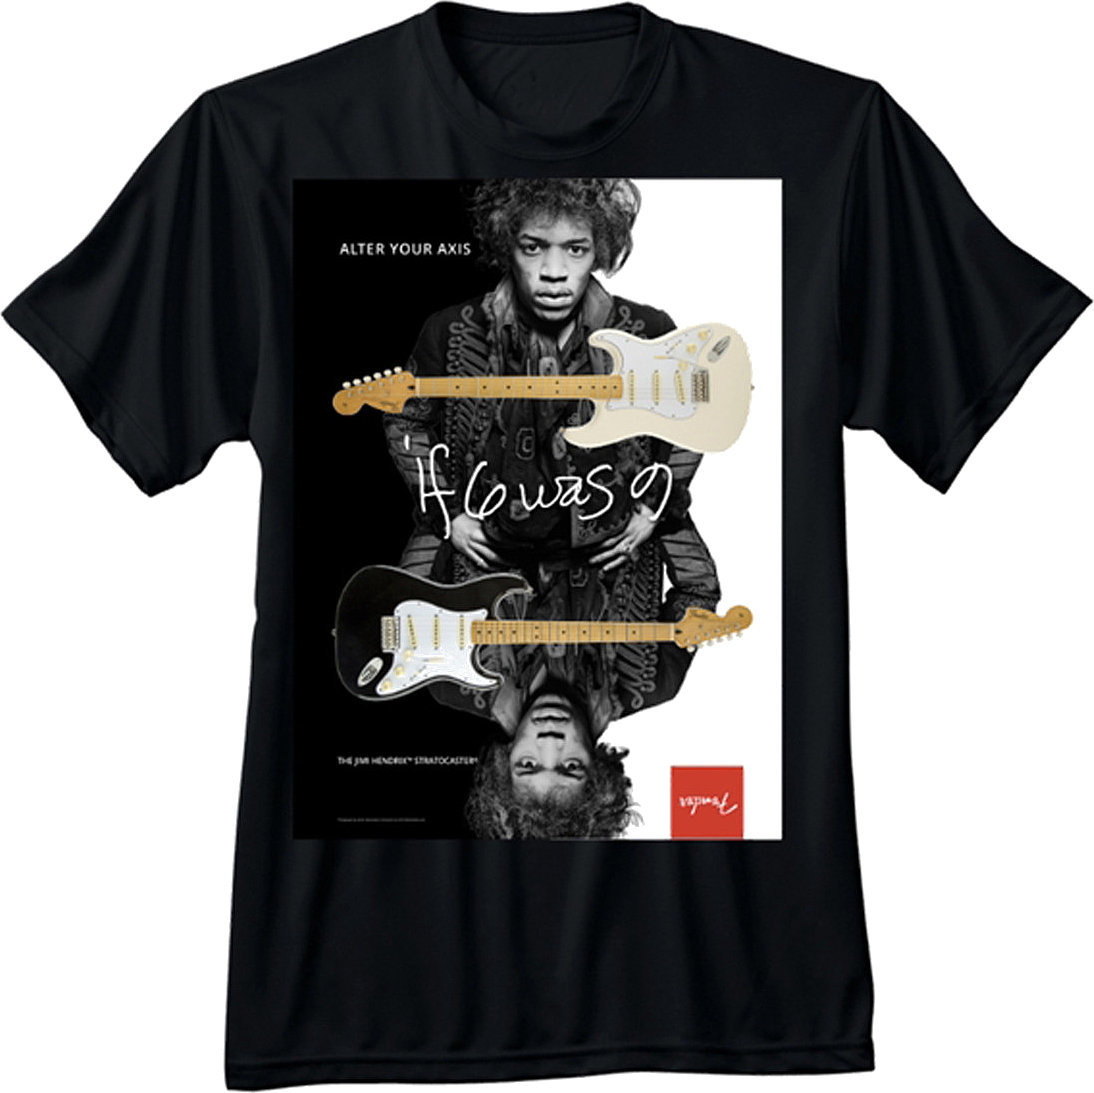 Maglietta Fender Jimi Hendrix Collection Alter Your Axis T-Shirt Black XL